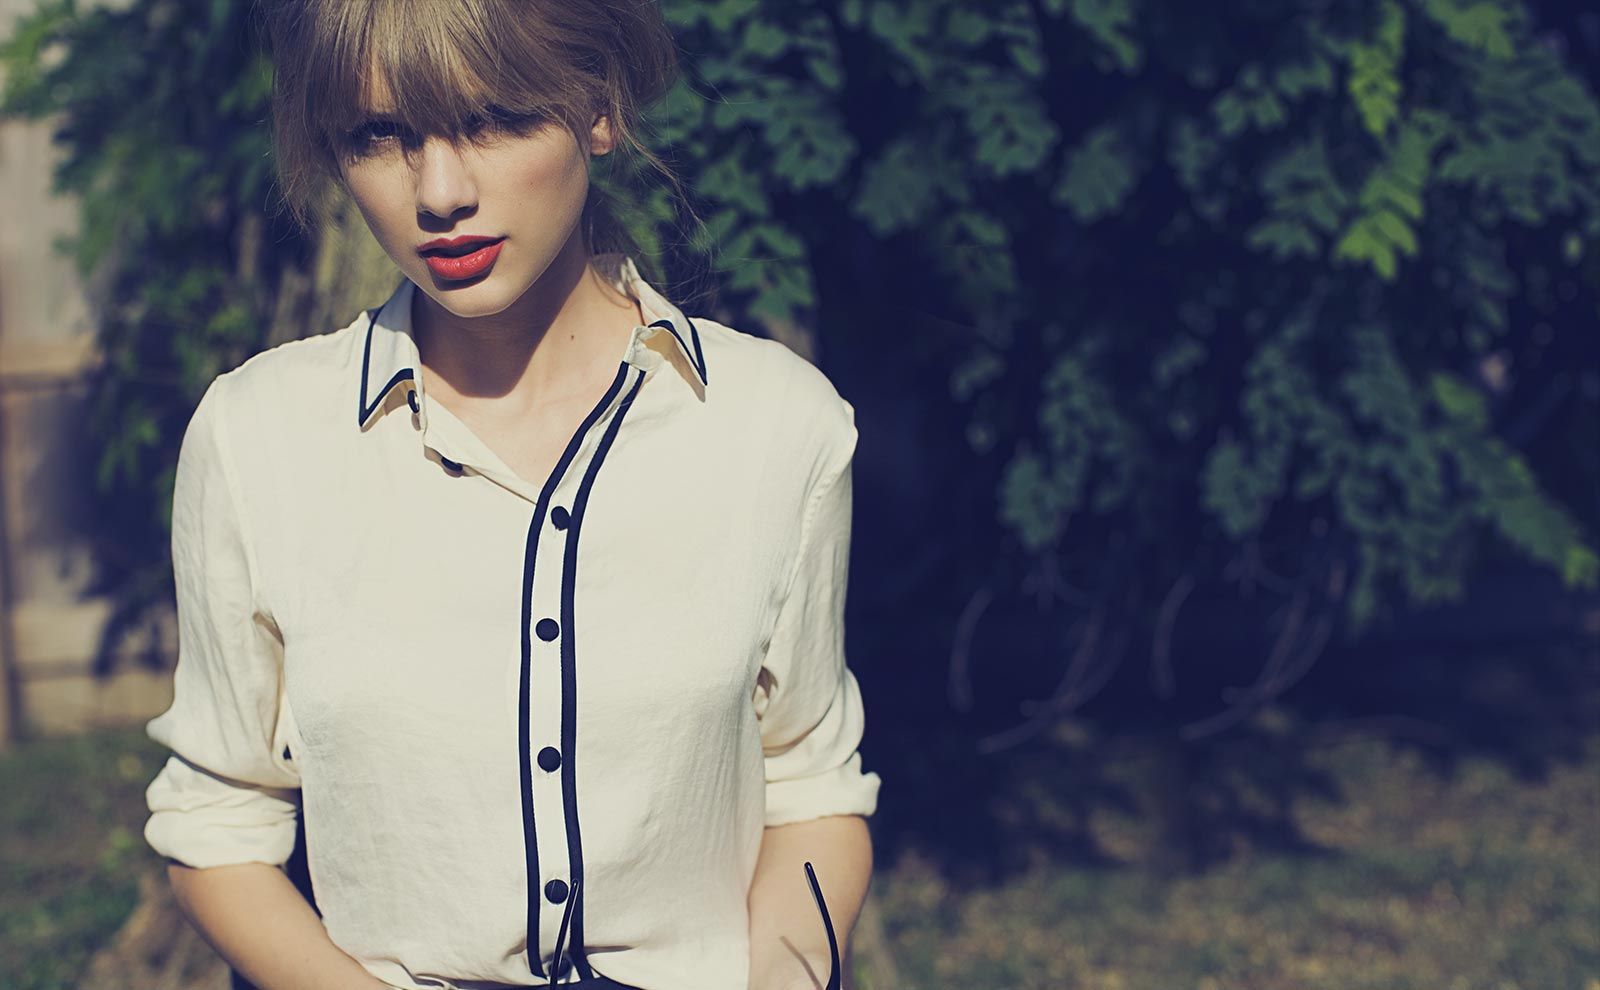 taylor swift red photoshoot hd